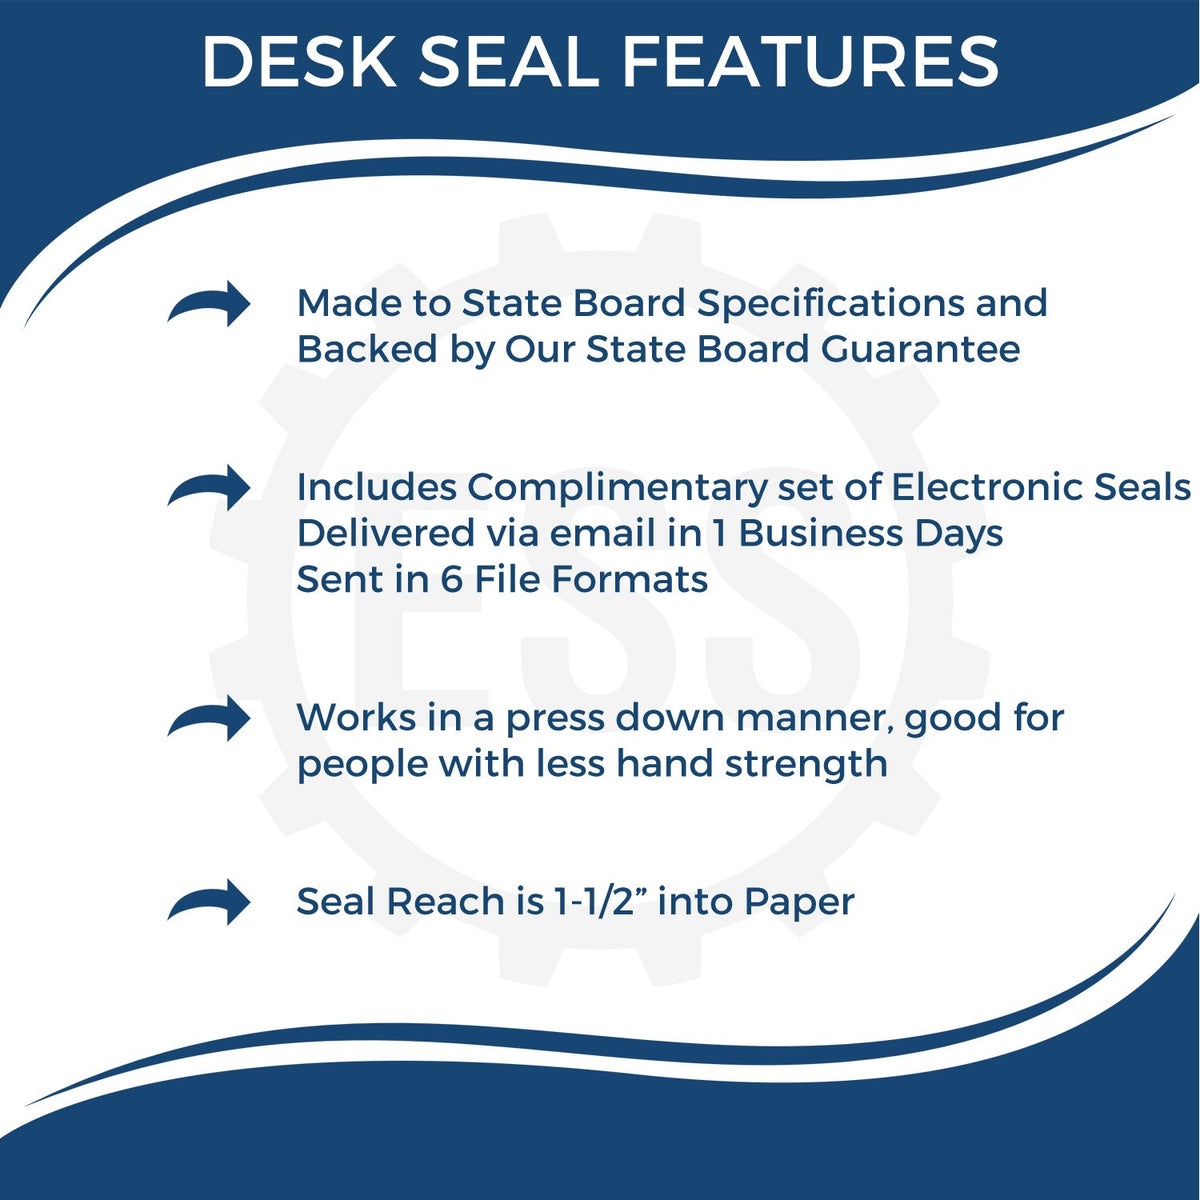 A picture of an infographic highlighting the selling points for the West Virginia Geologist Desk Seal